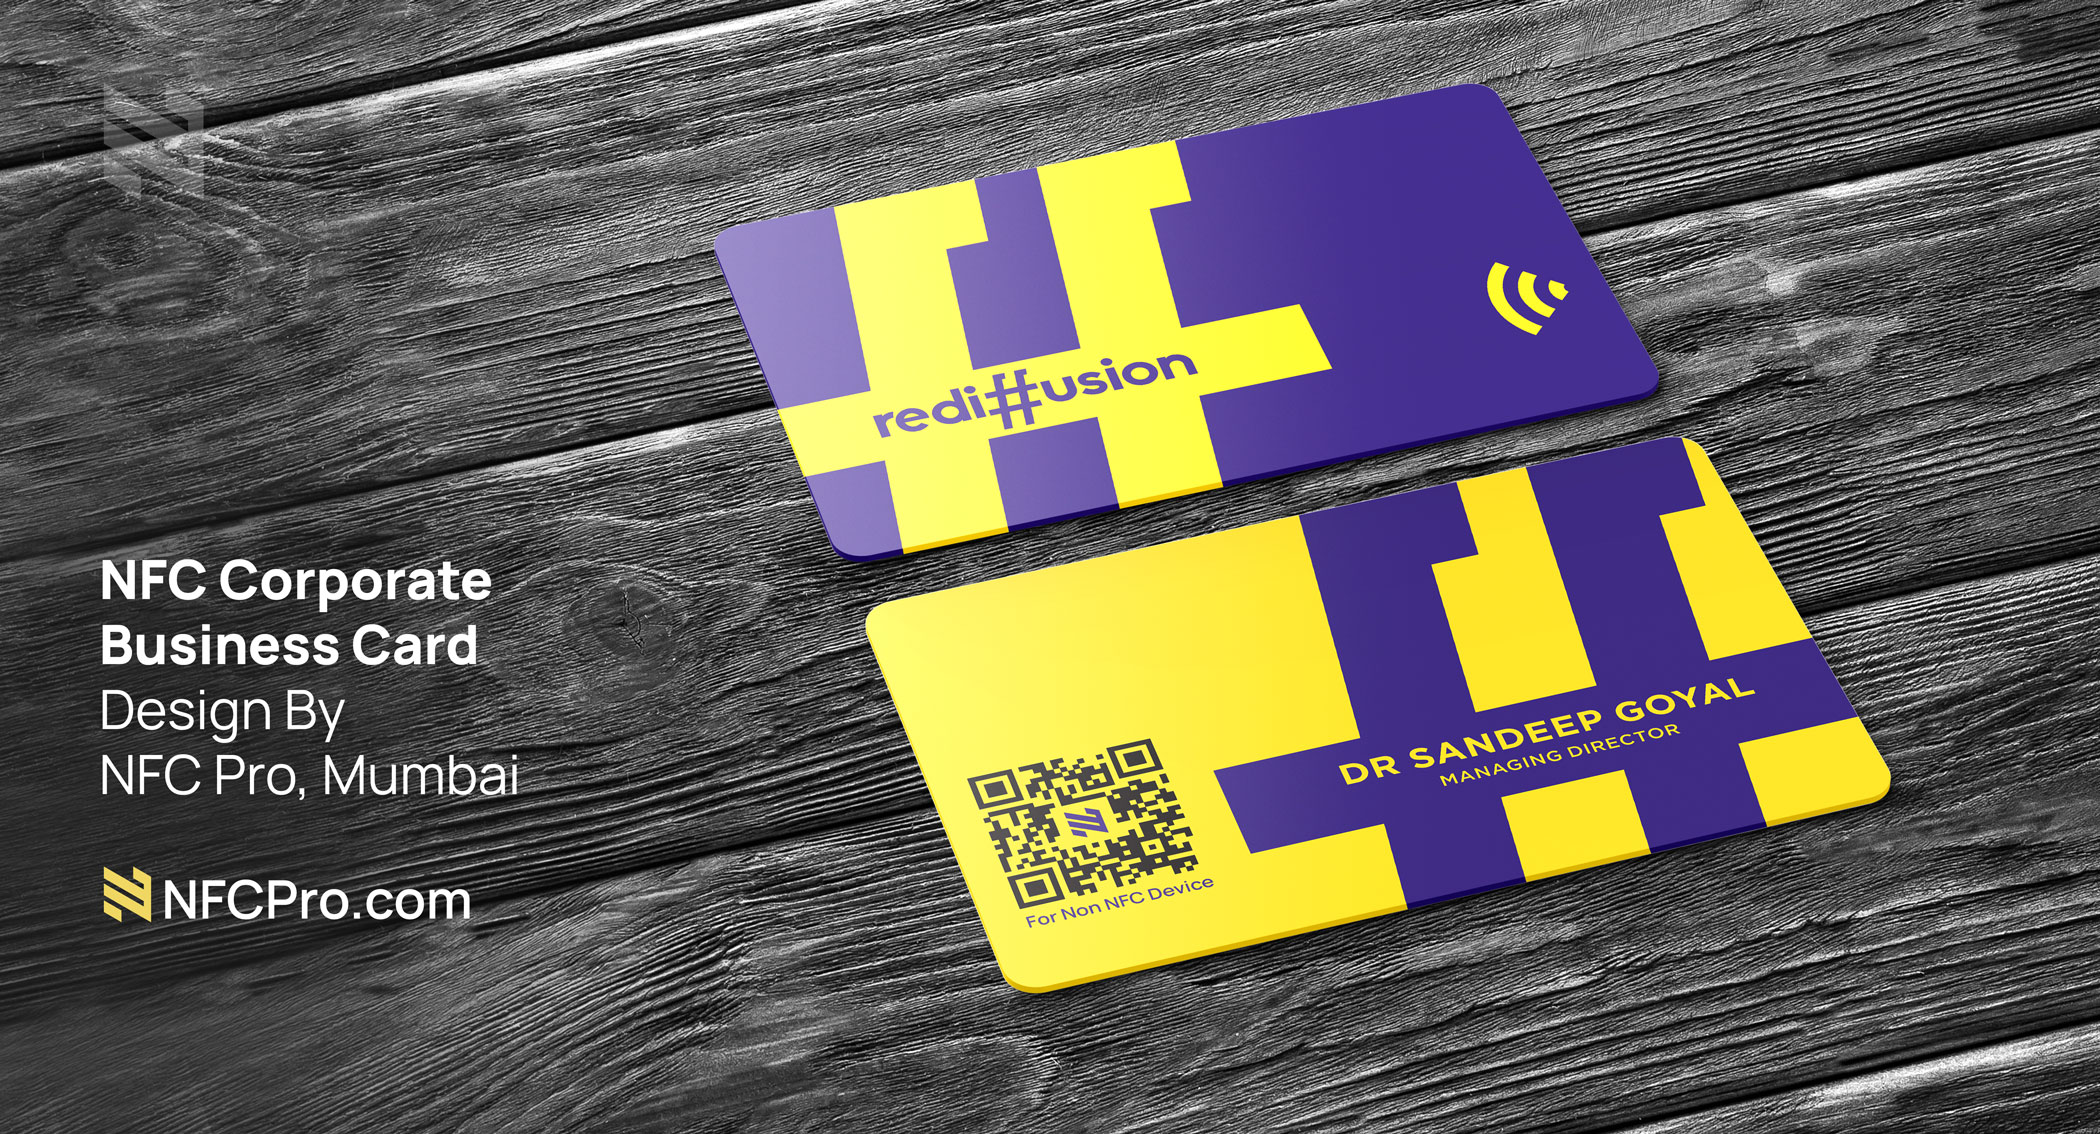 Business Visiting Card Design With NFC QR Code For Modern Business Communication